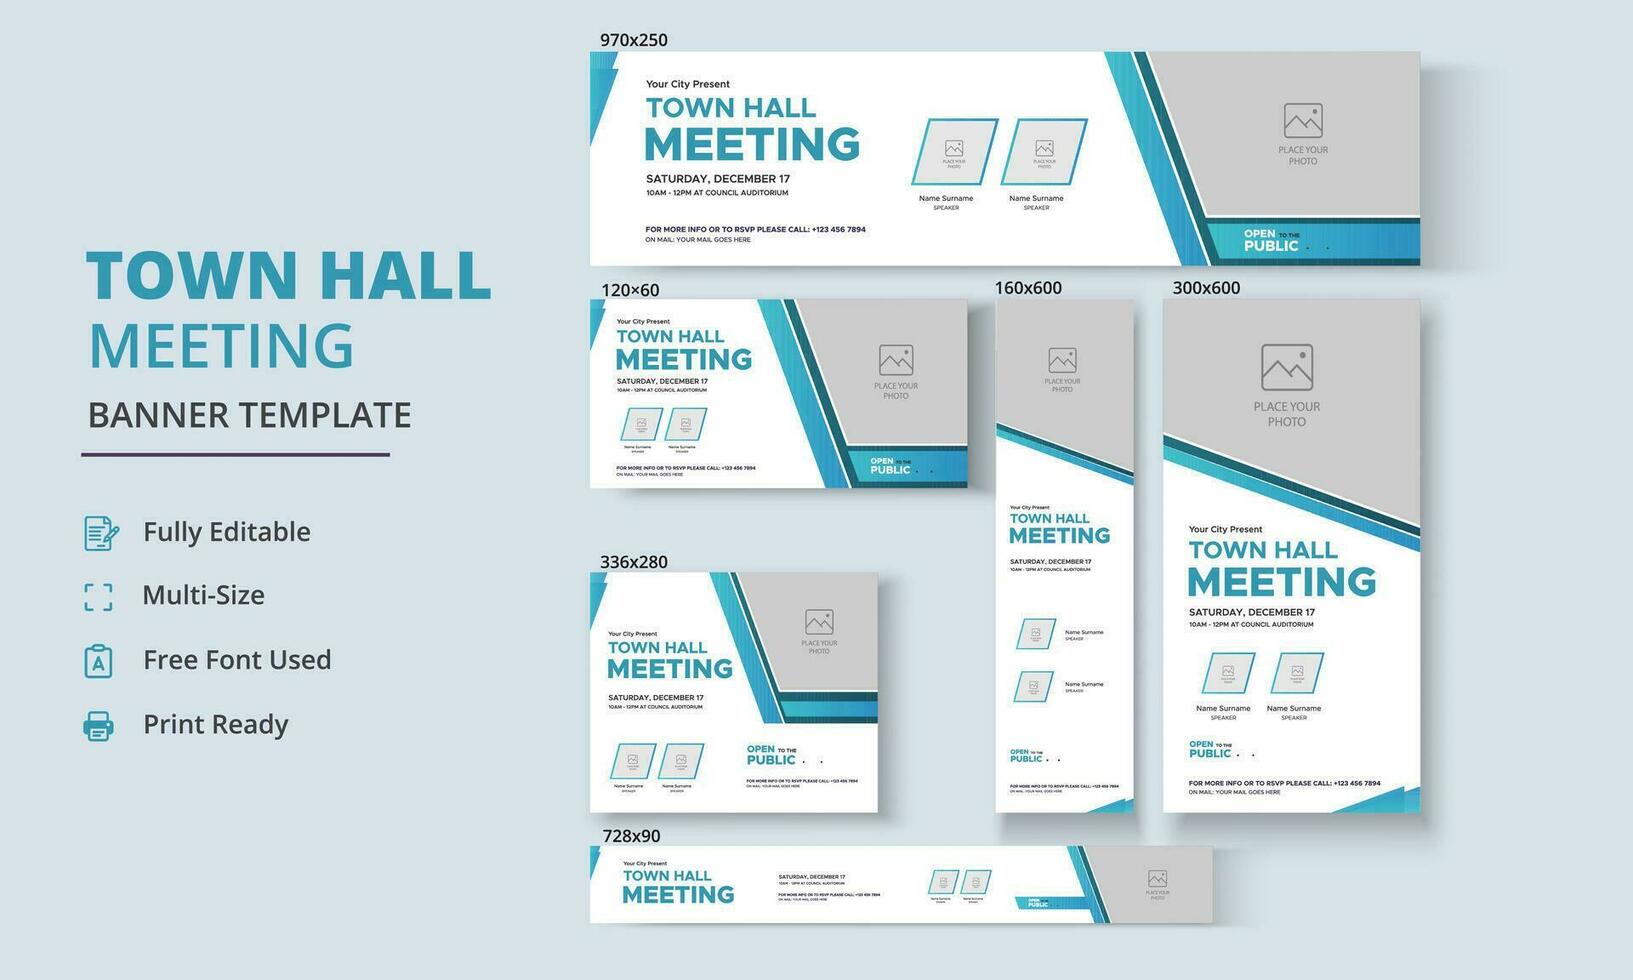 Town Hall Meeting Banner Templates, City Hall Banner and Poster vector